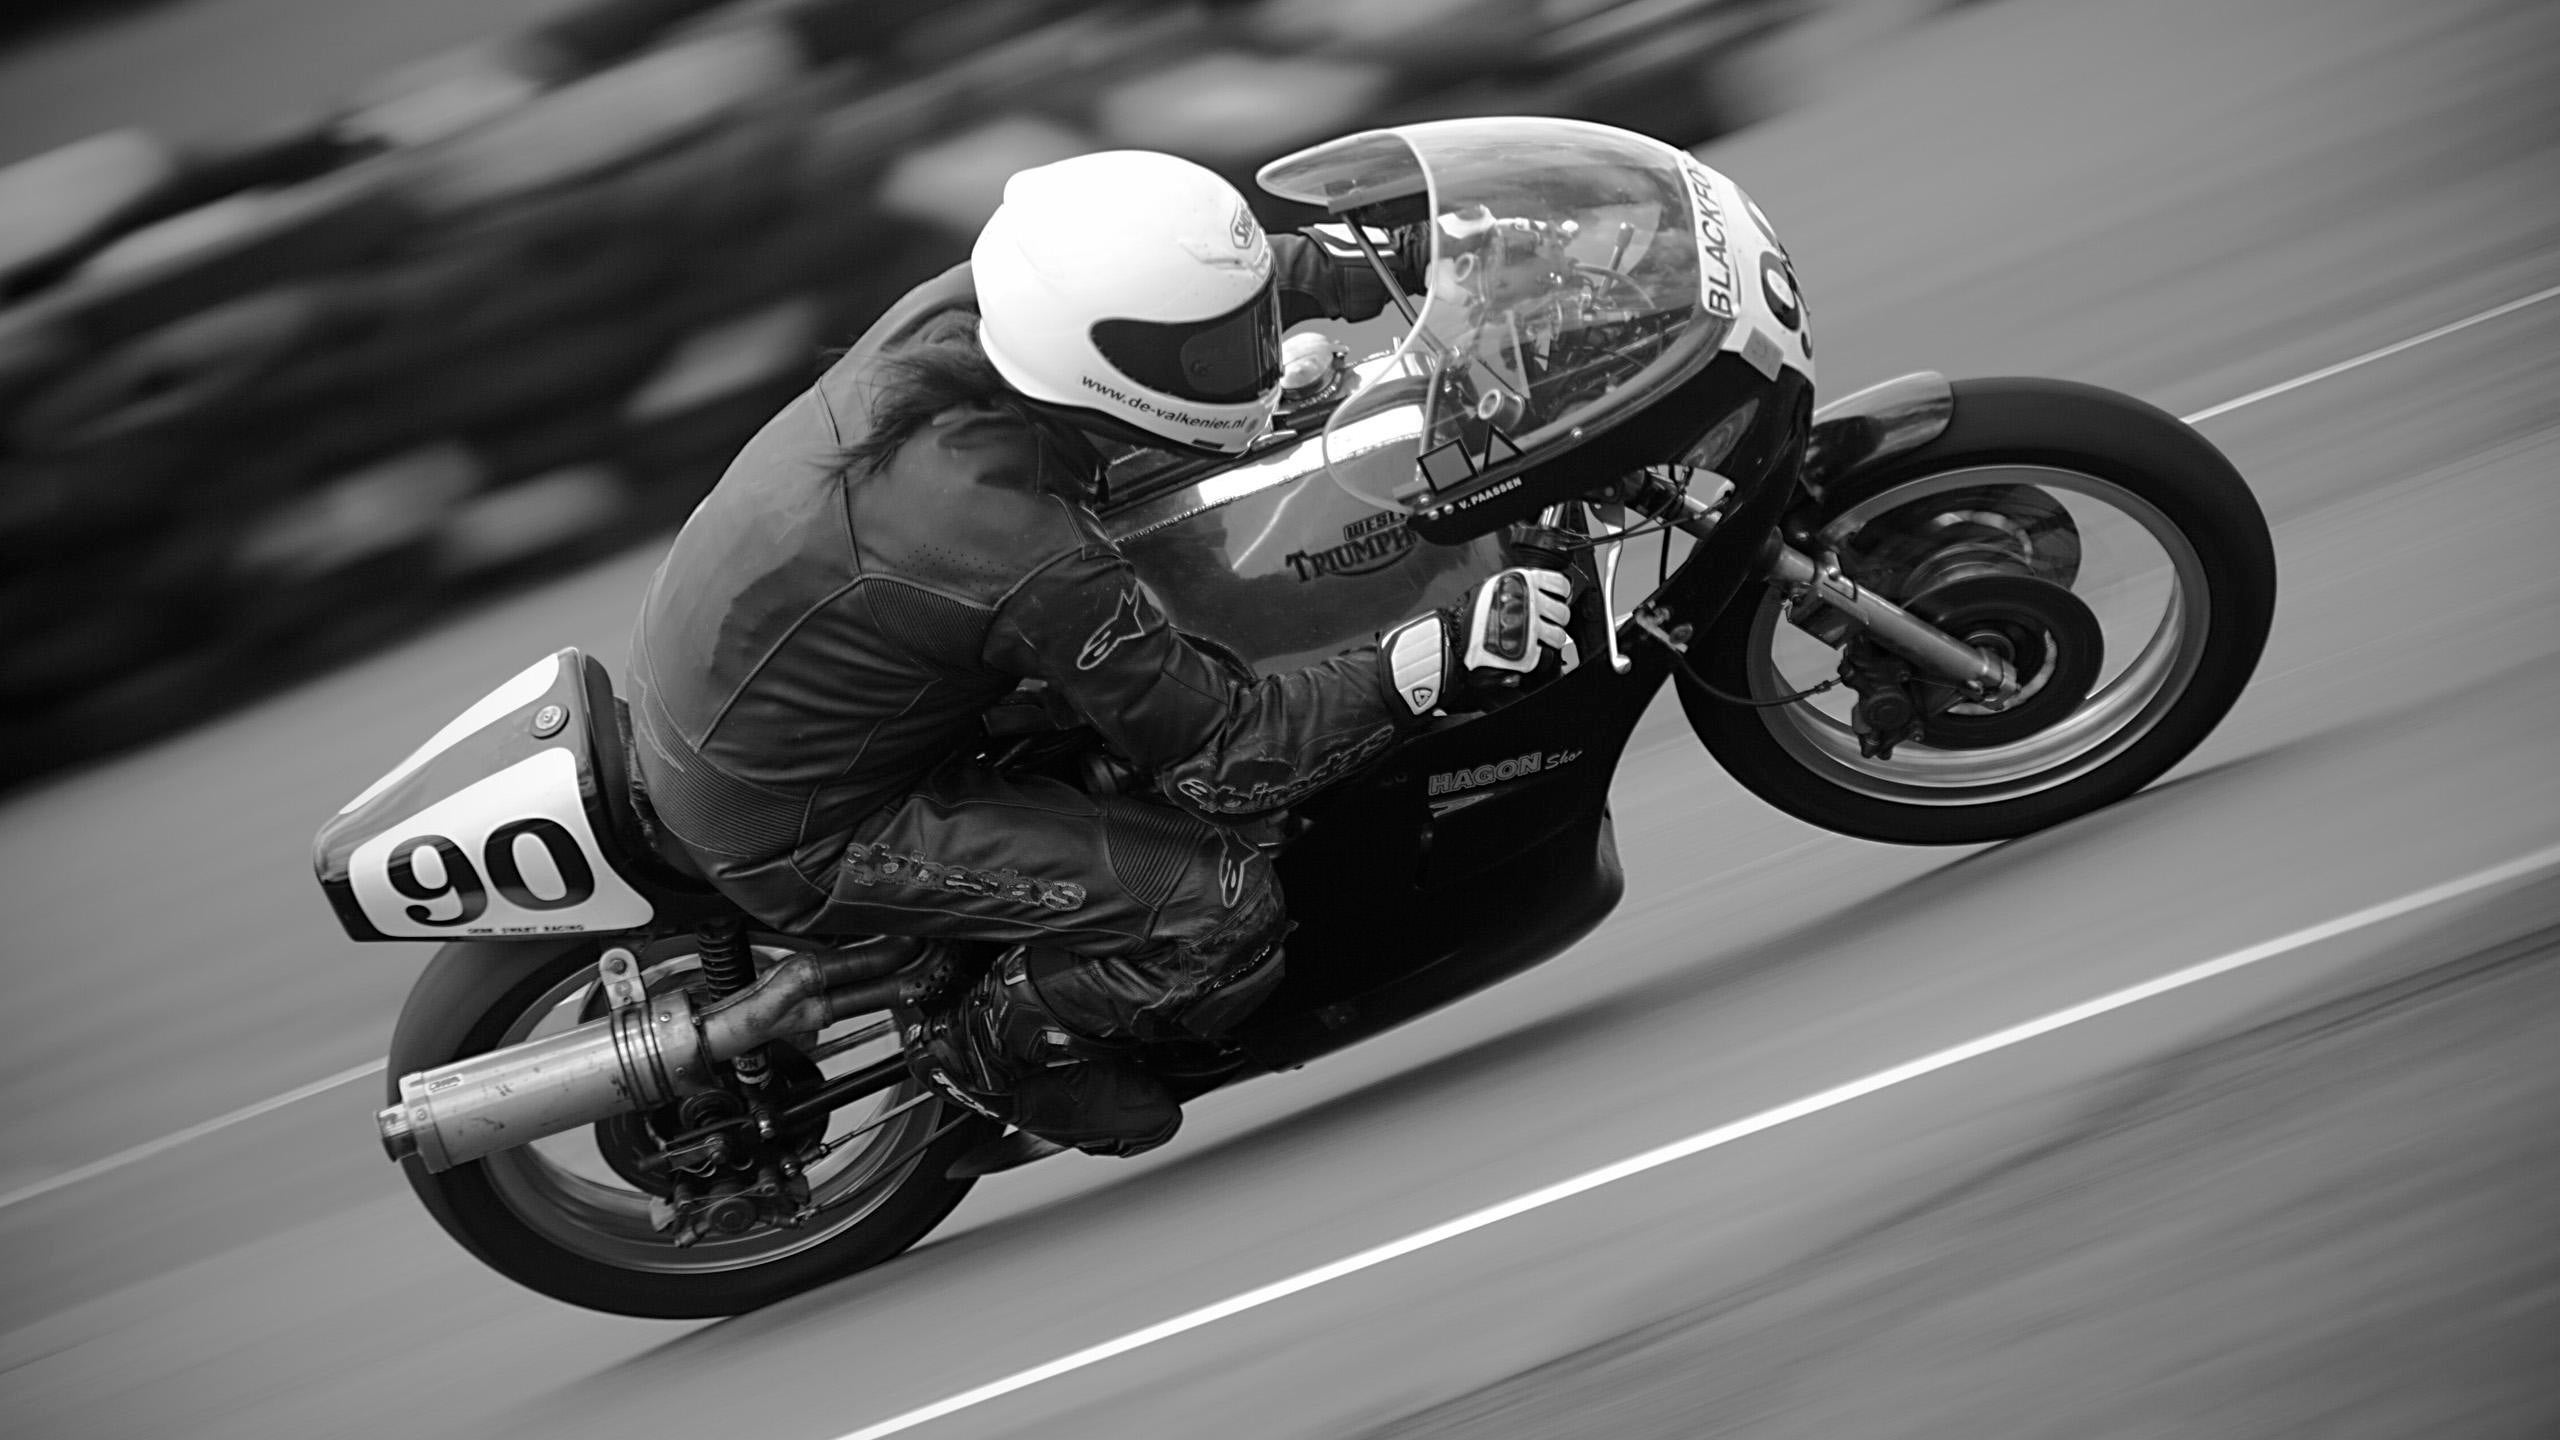 Motorcycle 4K wallpapers for your desktop or mobile screen free and